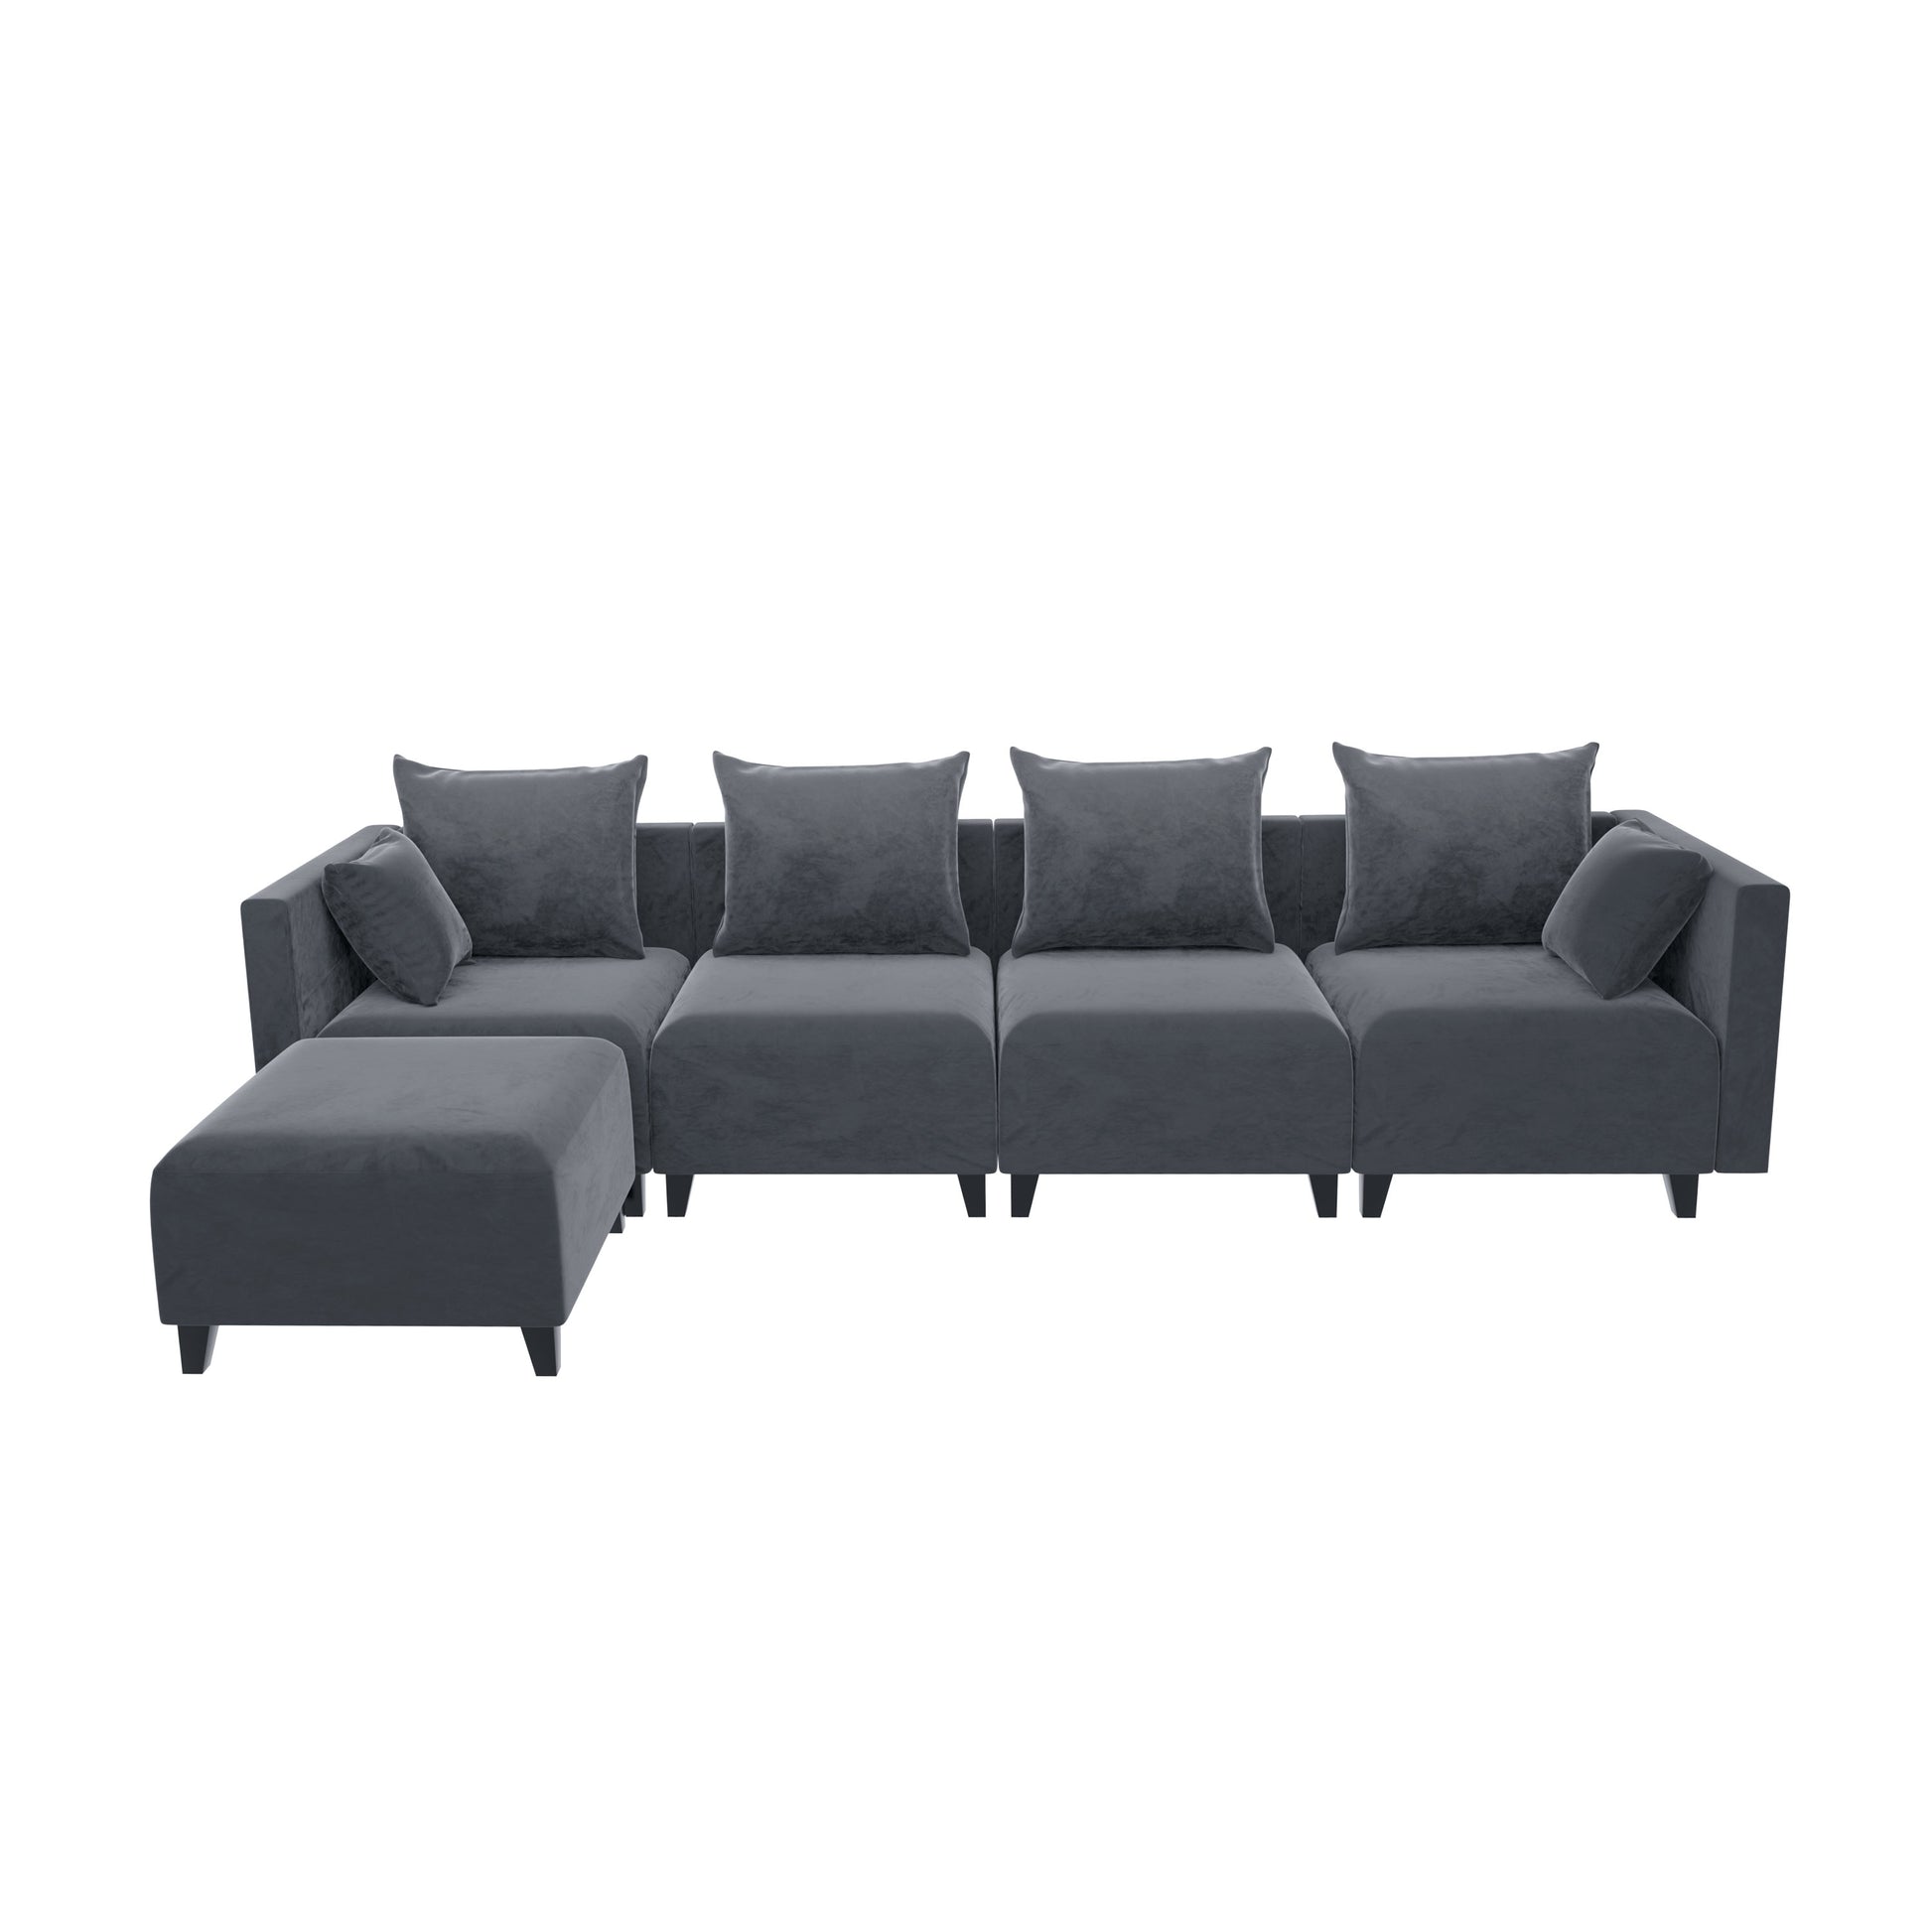 Sectional Sofa, L shape Module Couch with 5 seats 6 Pillows